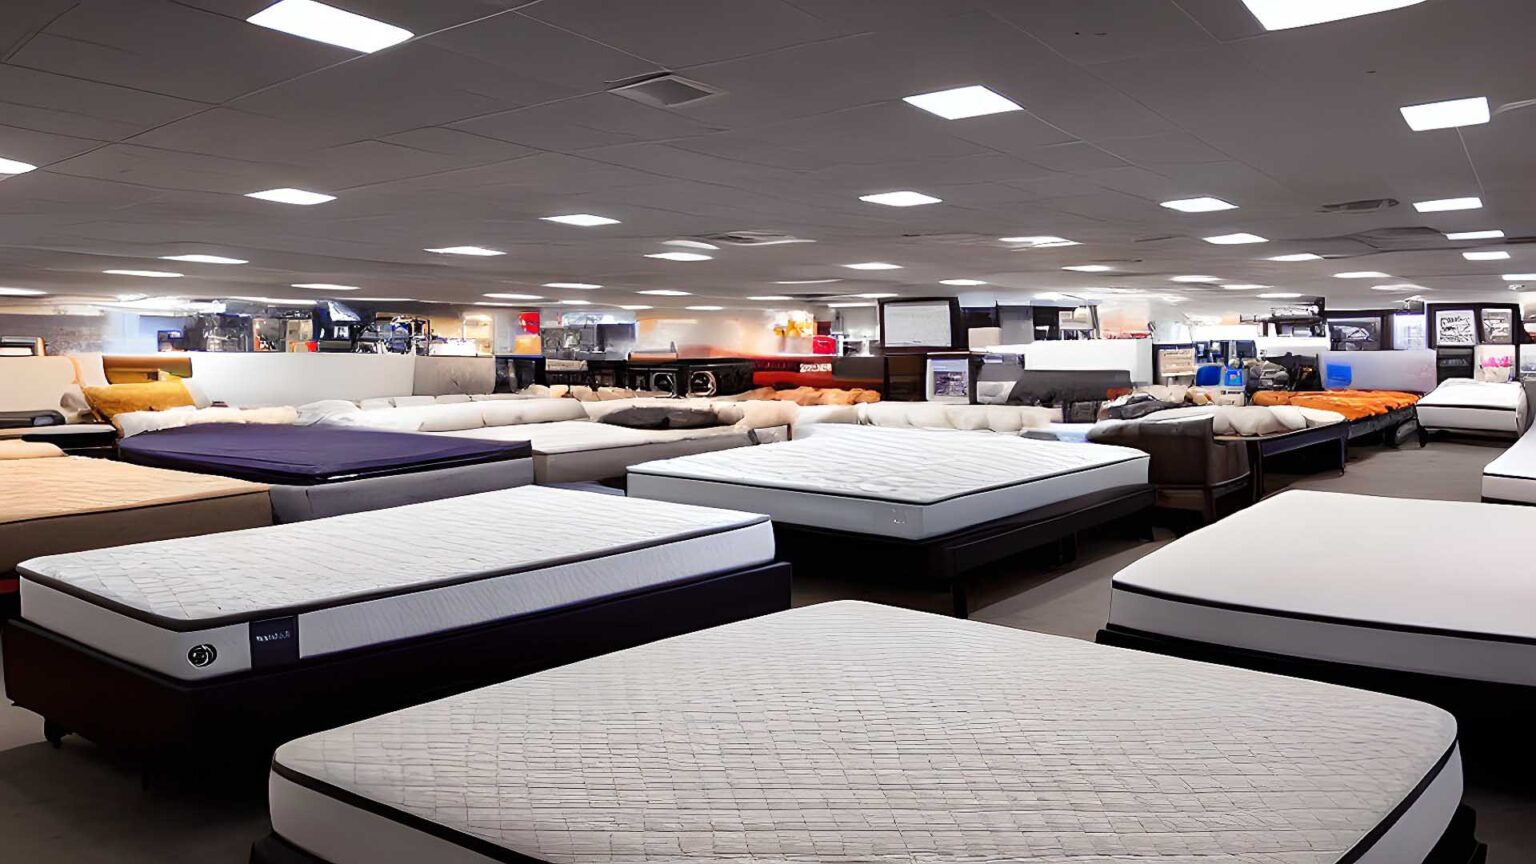 Mattress Stores, mattress dealers, and mattress retailers near me in Coral Springs, FL